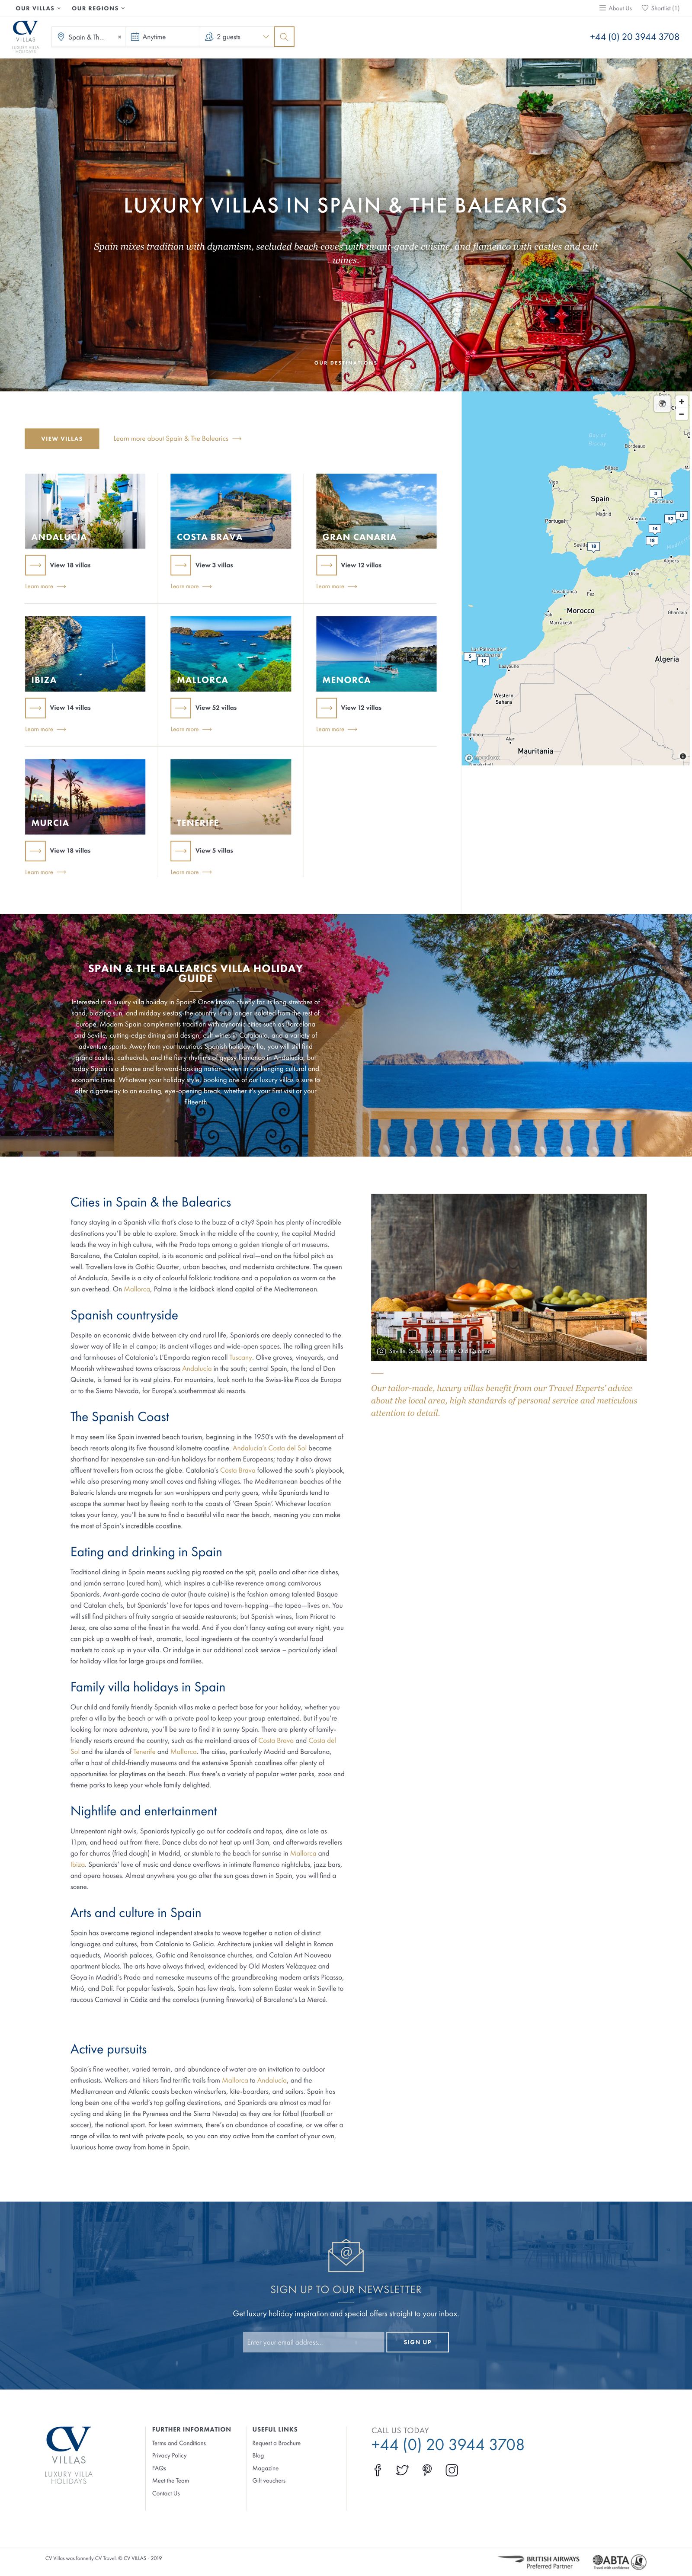 Digital design and front-end development of the destination template